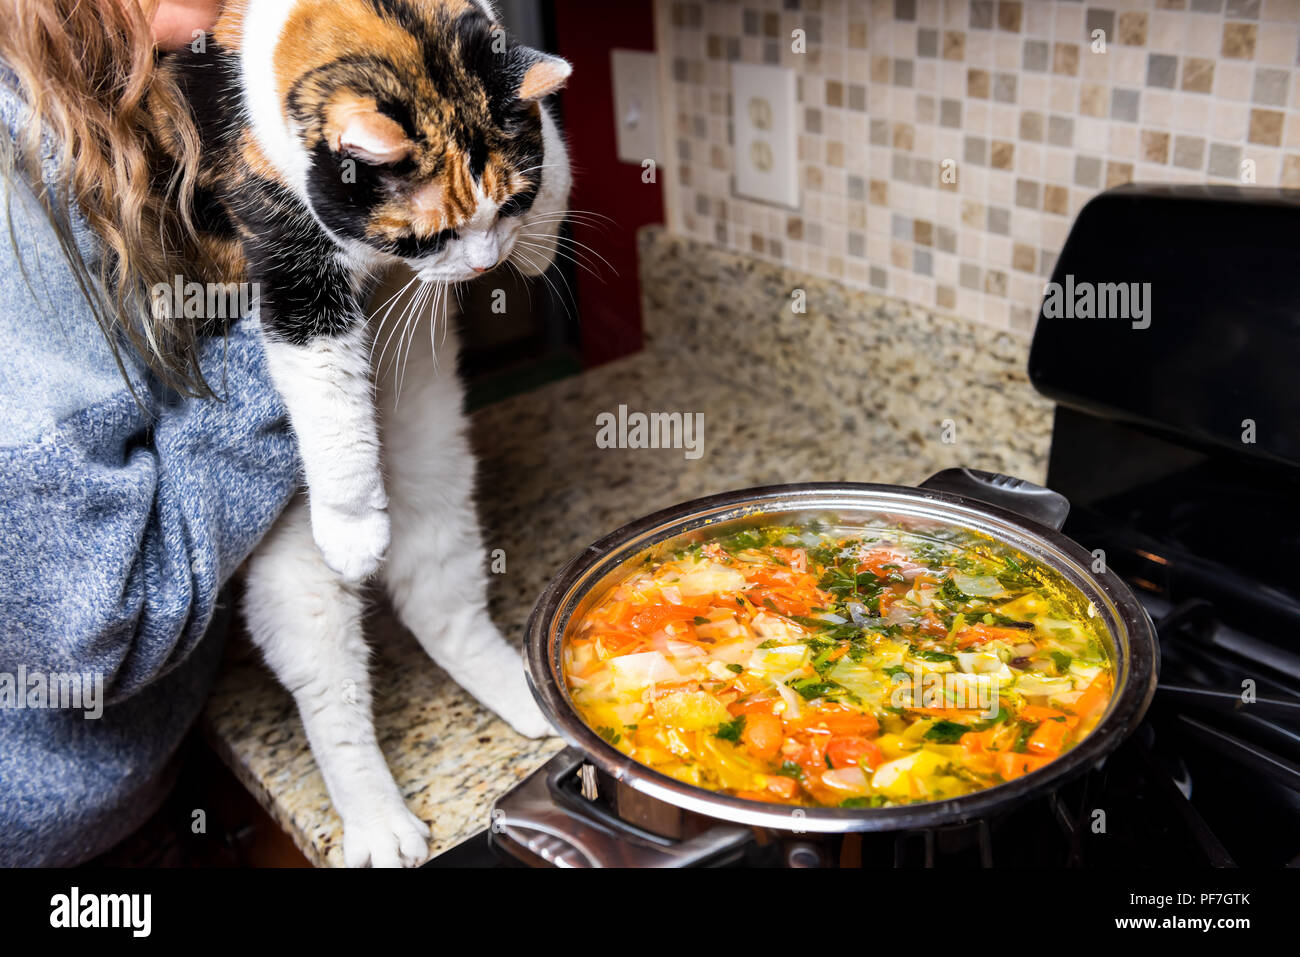 Woman holding one naughty mischief guilty curious calico cat by homemade vegetable soup on counter top in kitchen, hot steam Stock Photo